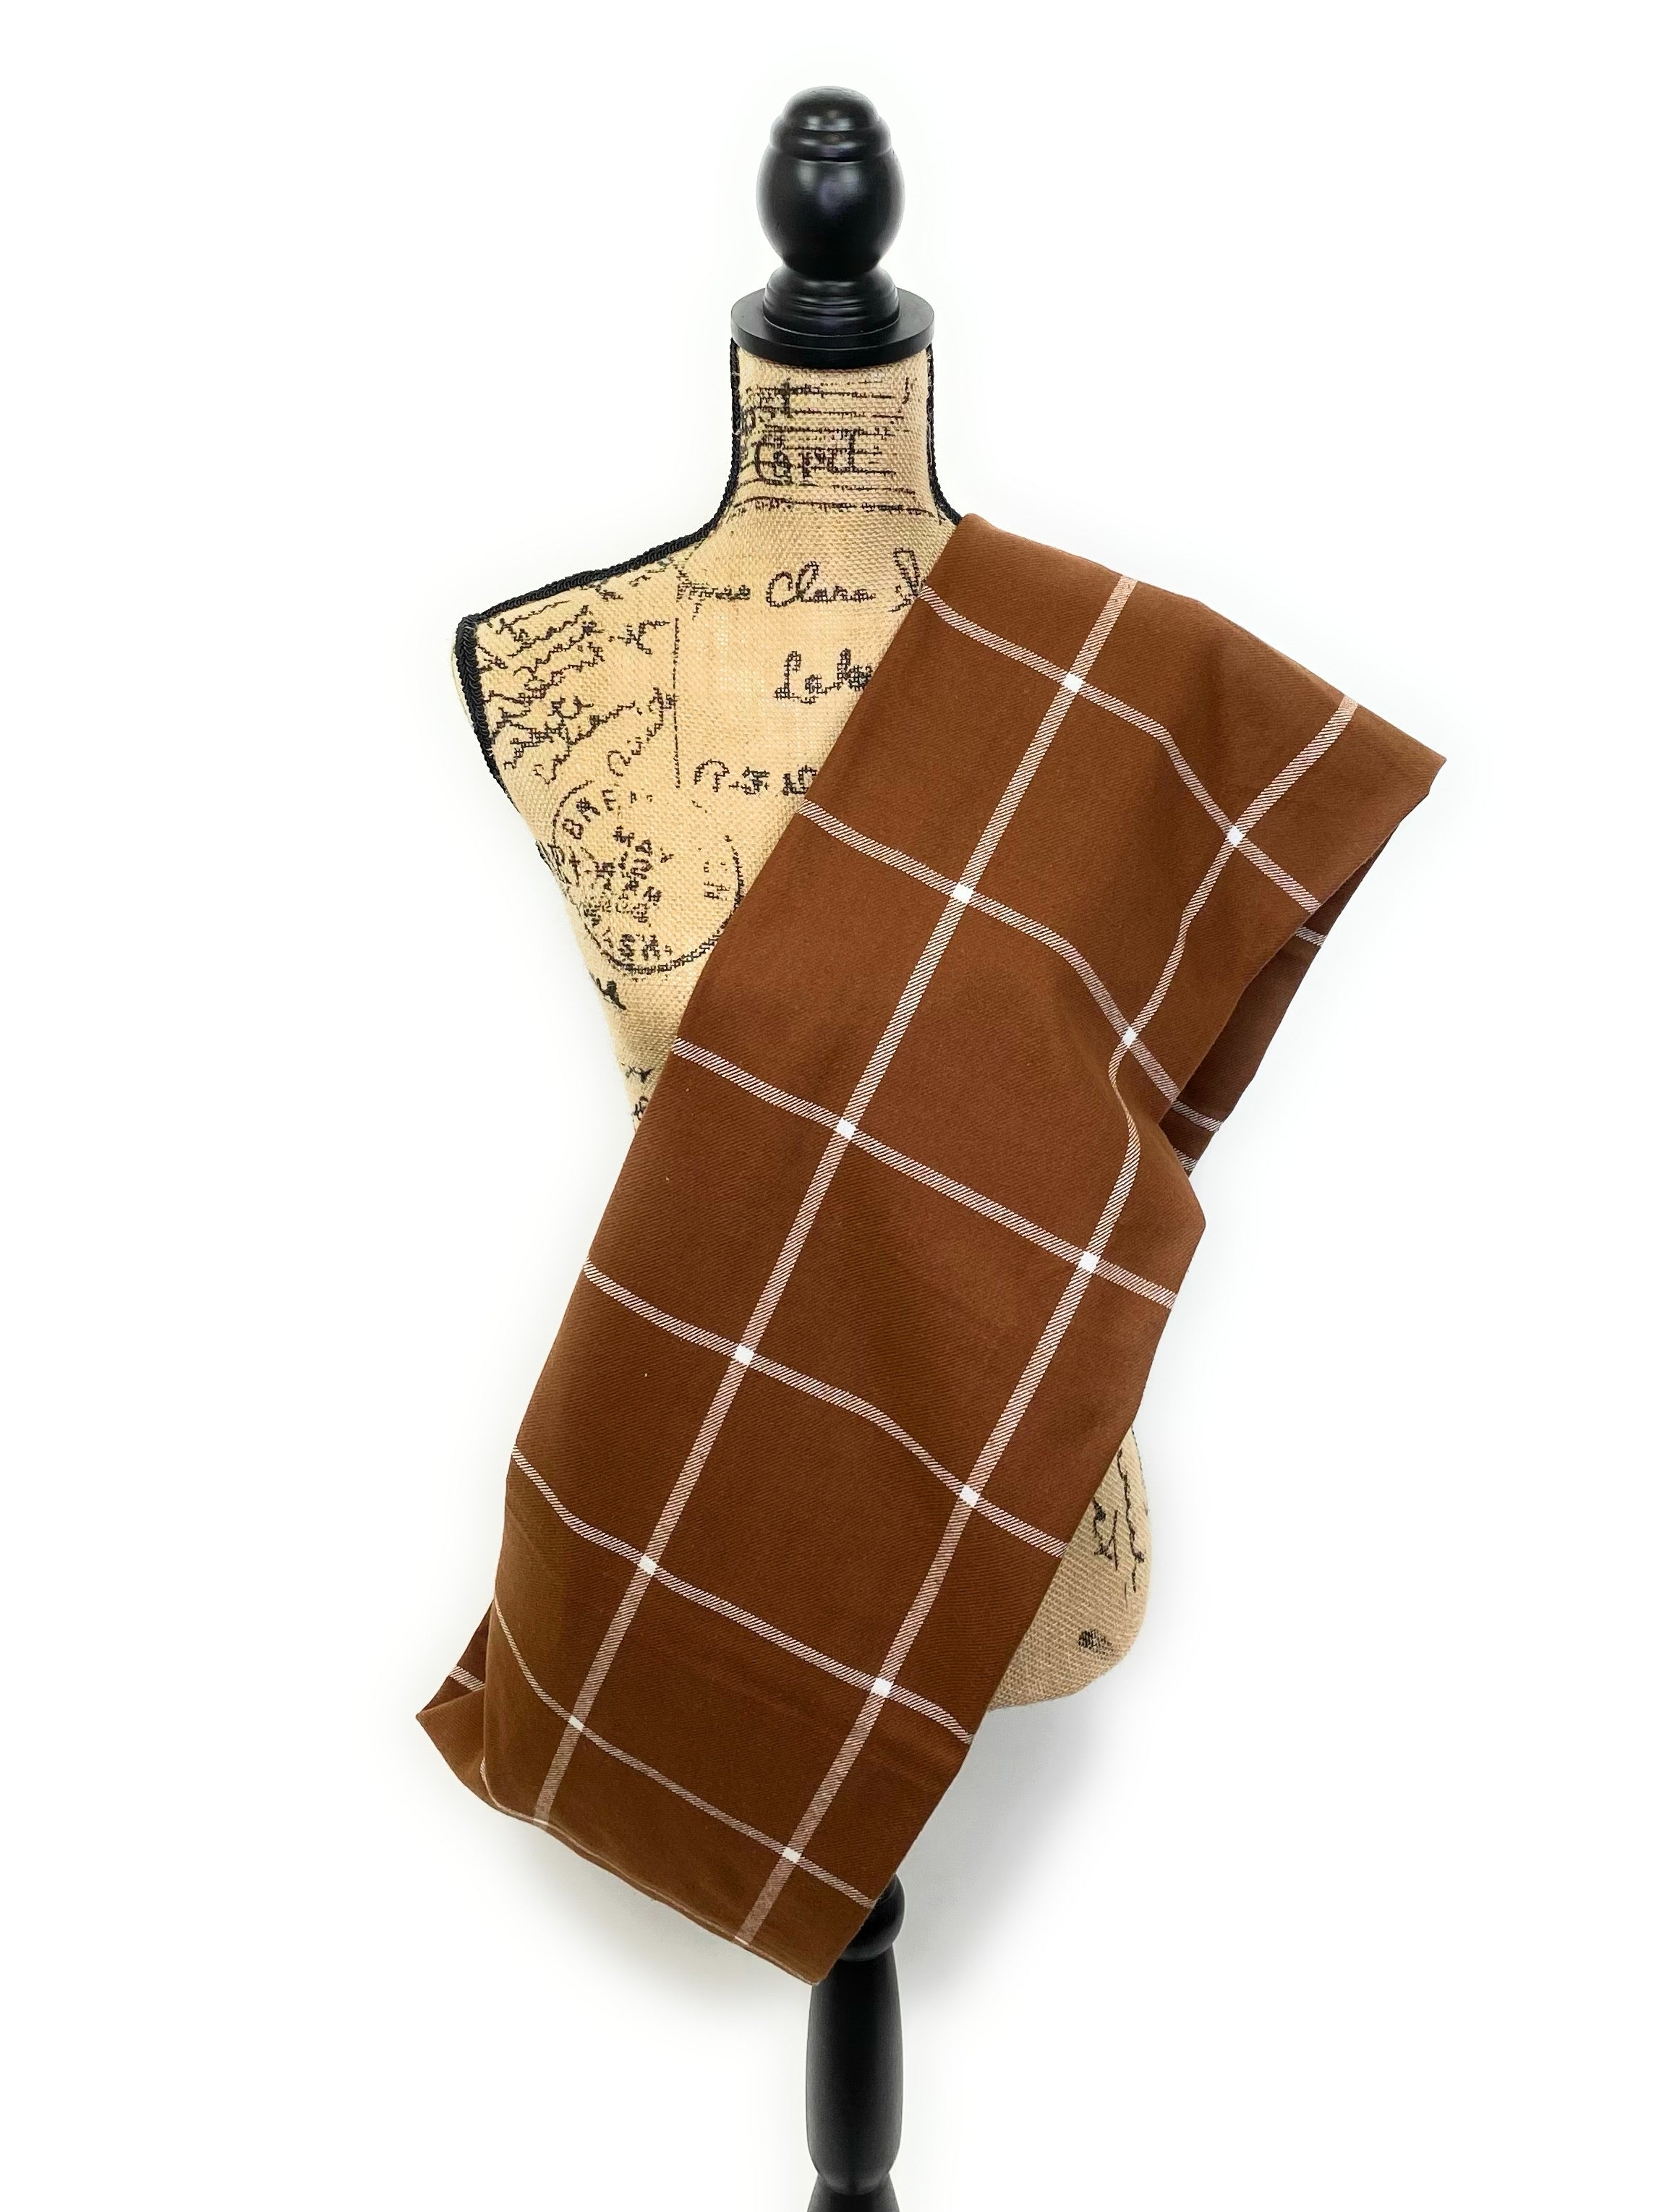 Chestnut Brown and Cream Large Windowpane Plaid Flannel Infinity or Blanket Scarf